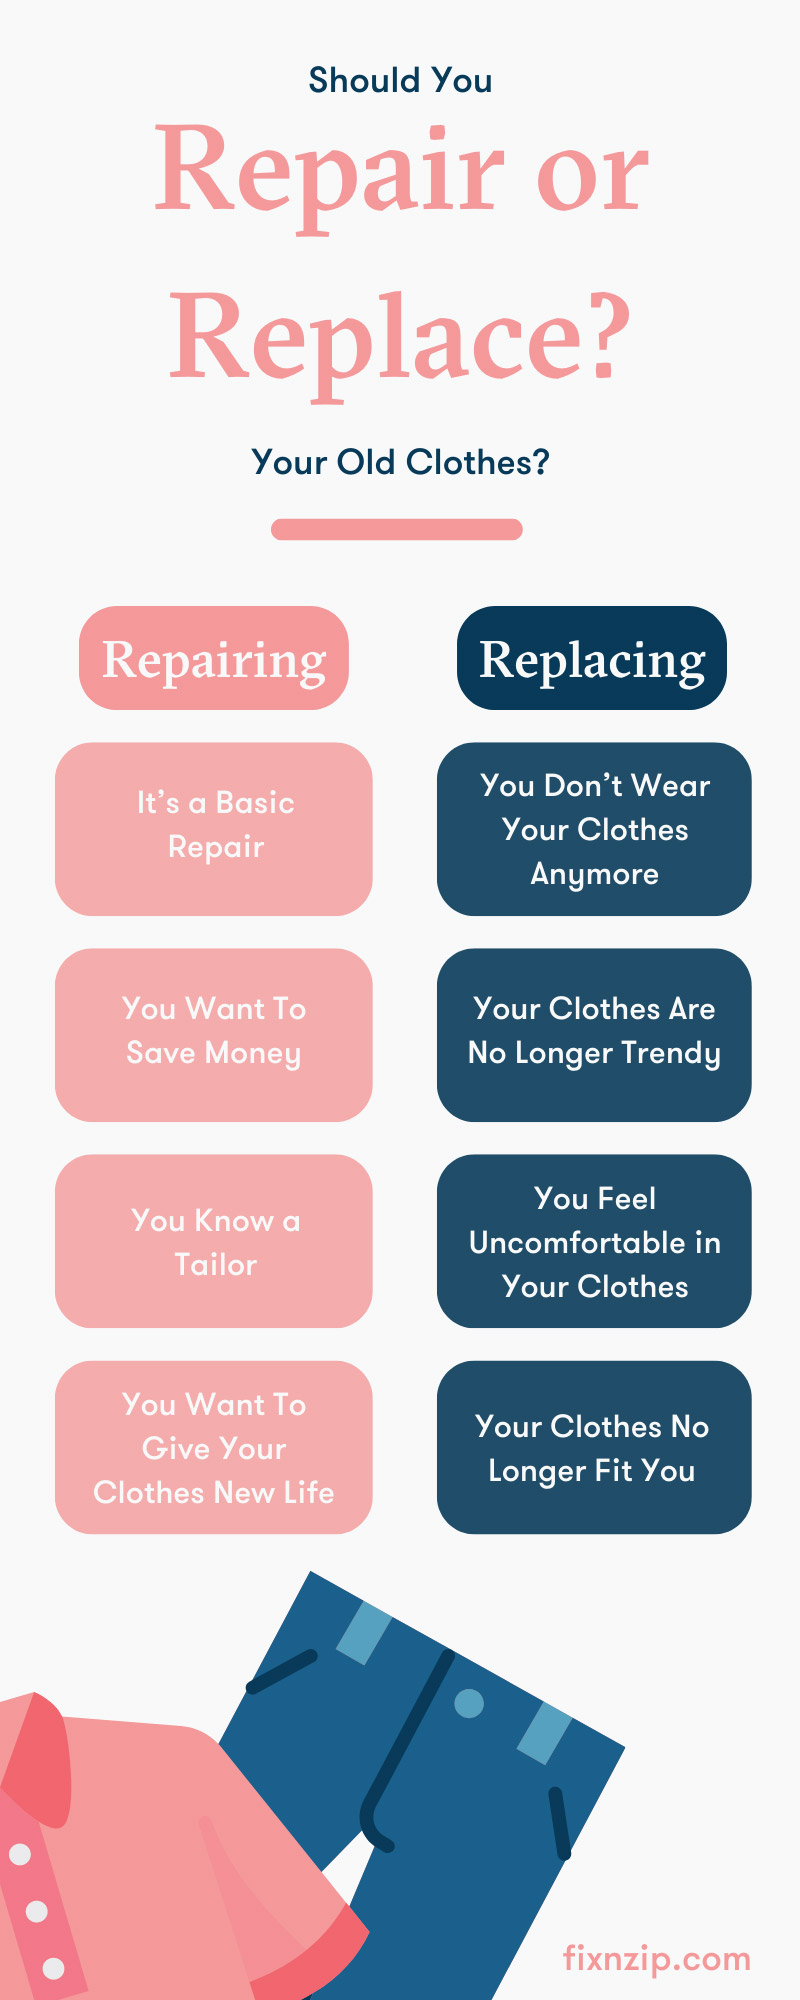 Repair or Replace? How To Assess Your Older Clothes
